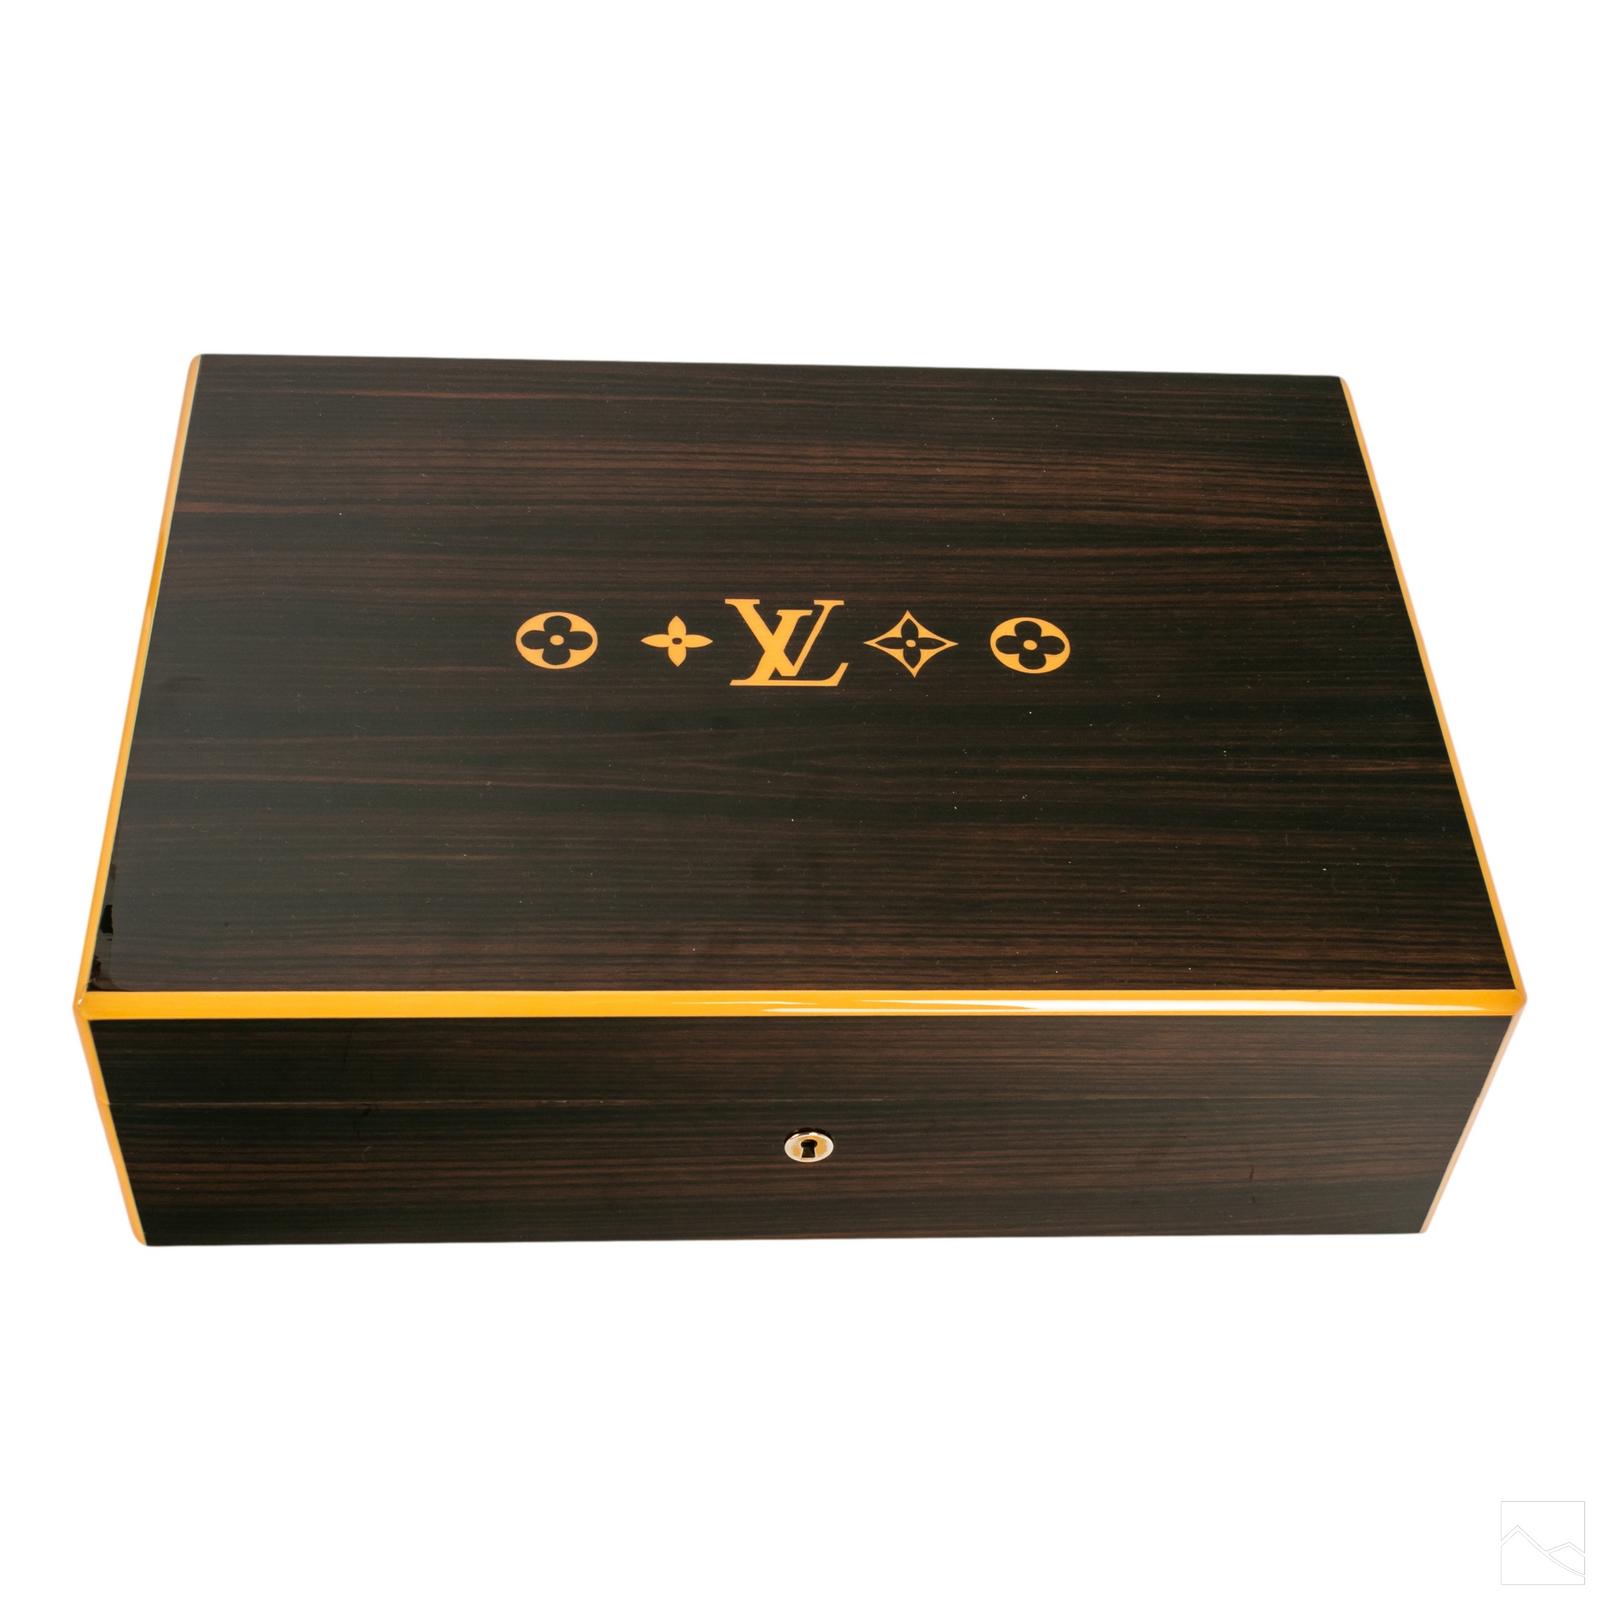 Sold at Auction: AUTHENTIC LOUIS VUITTON LEATHER EPI LEATHER, LEATHER CIGAR  HUMIDOR BOX